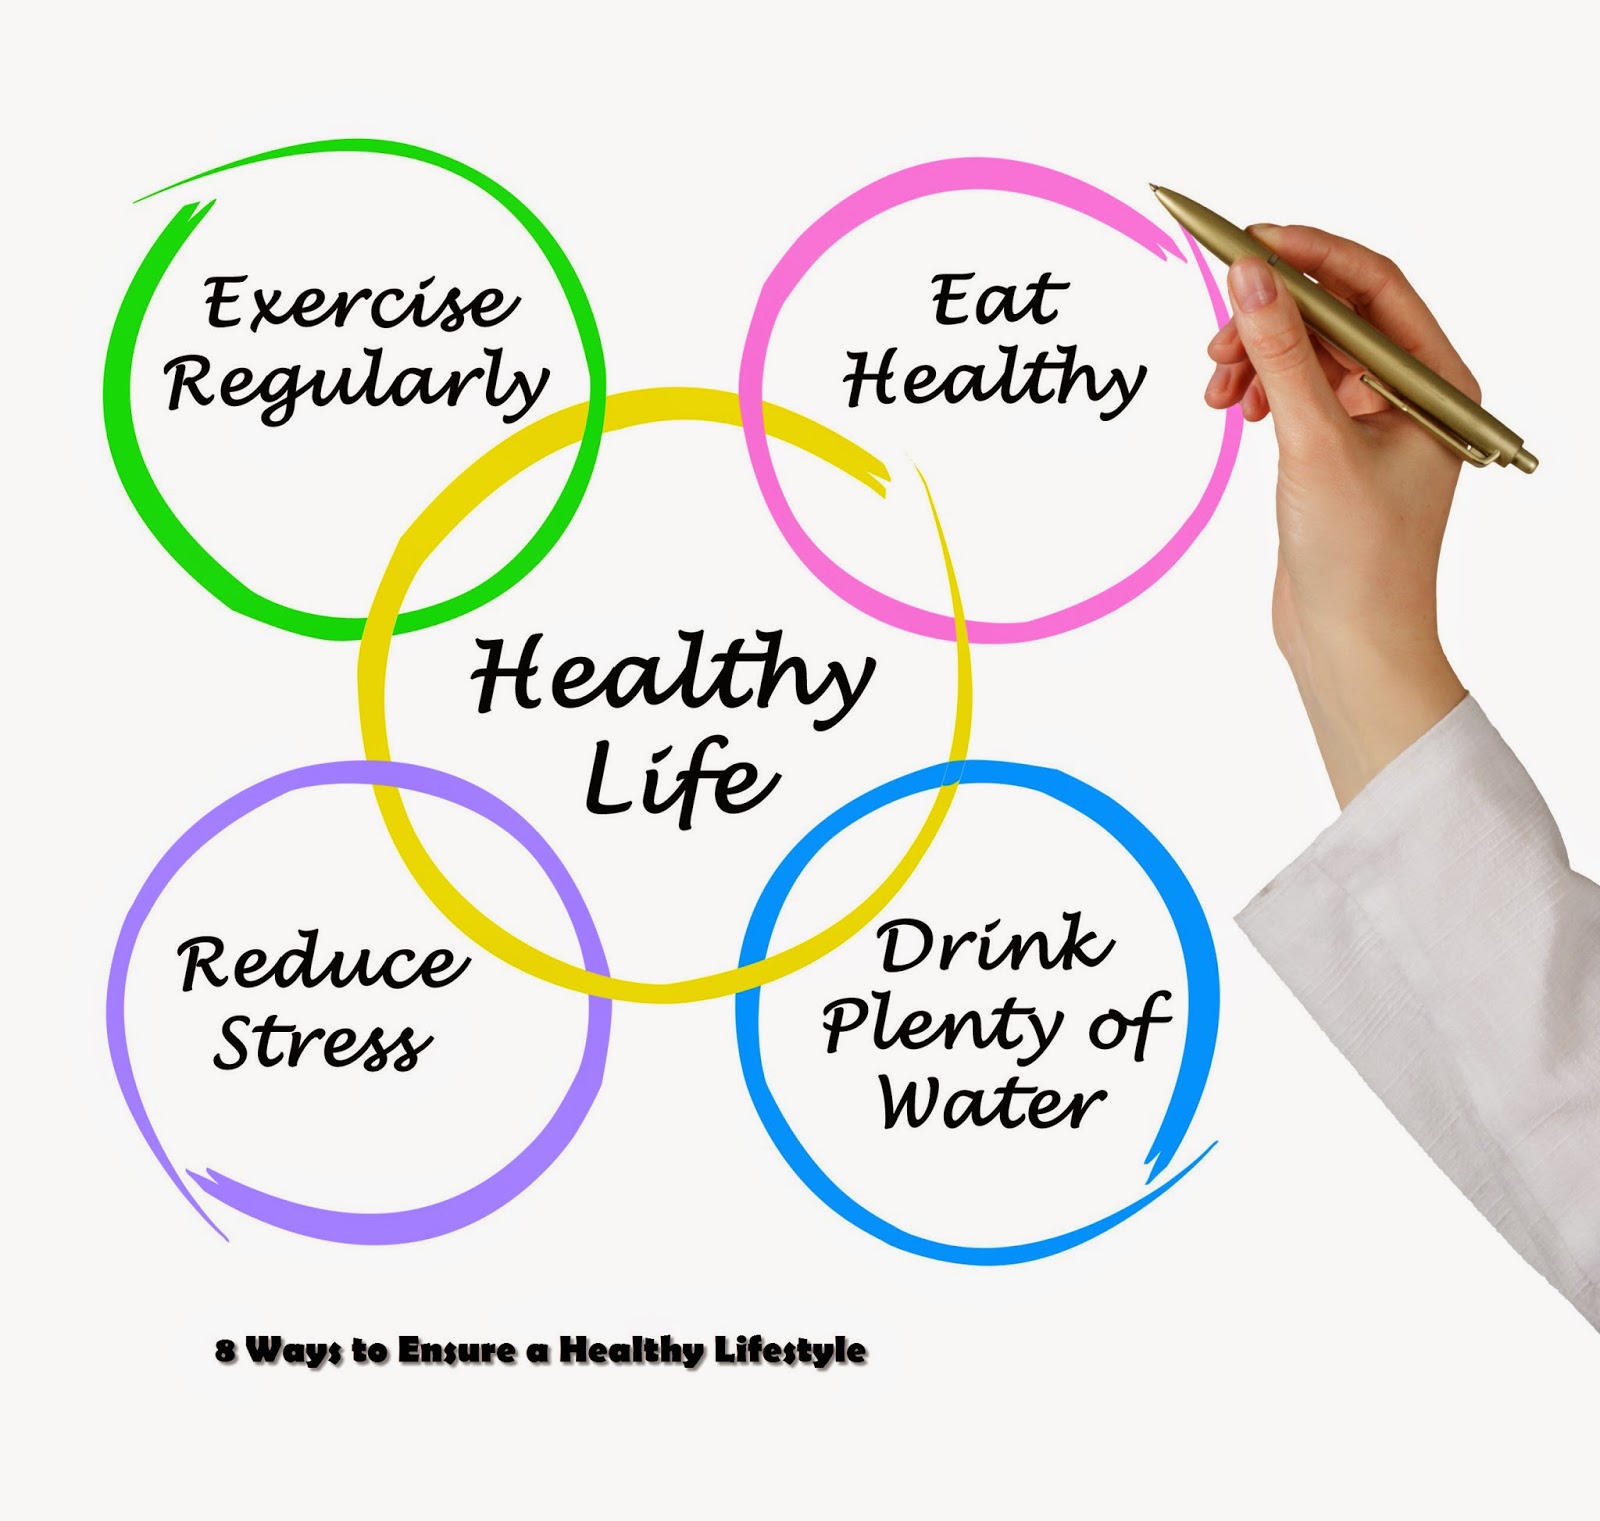 8 Ways to Ensure a Healthy Lifestyle